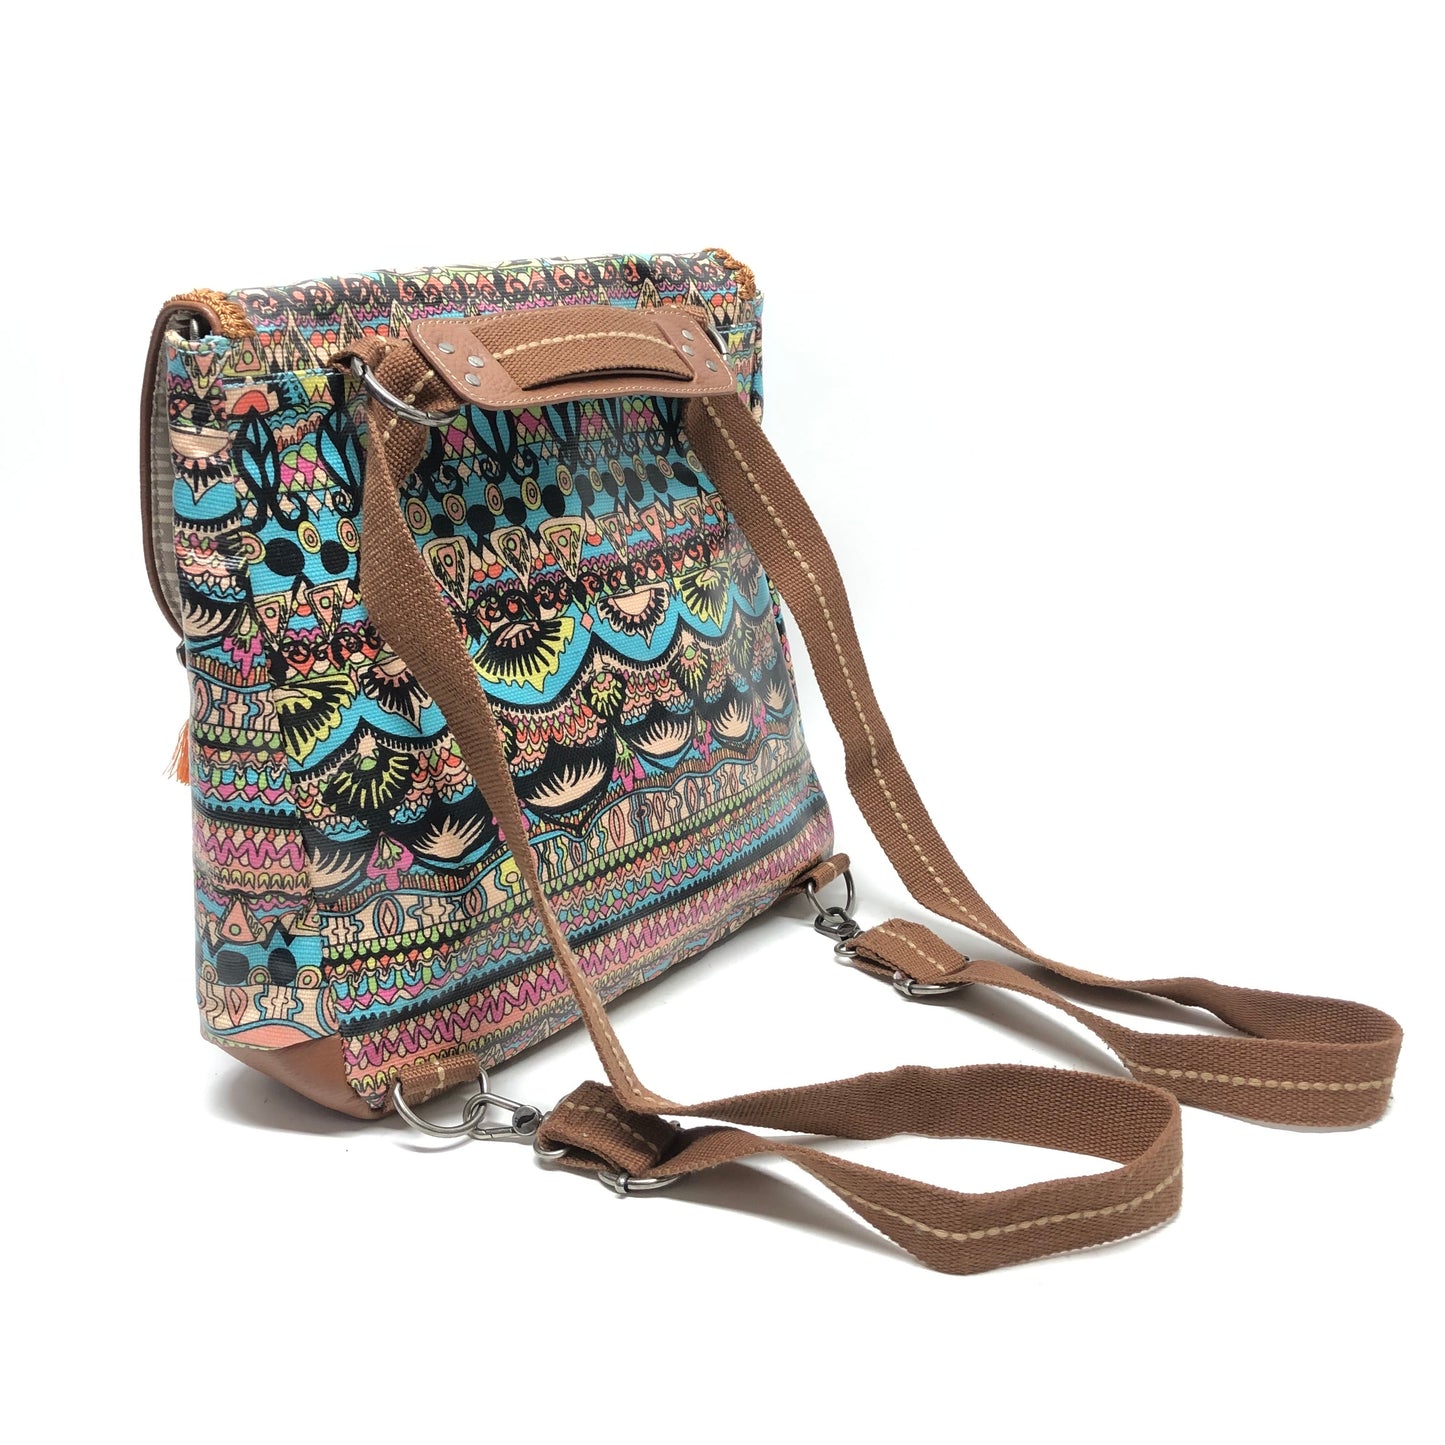 Backpack By Sakroots  Size: Medium